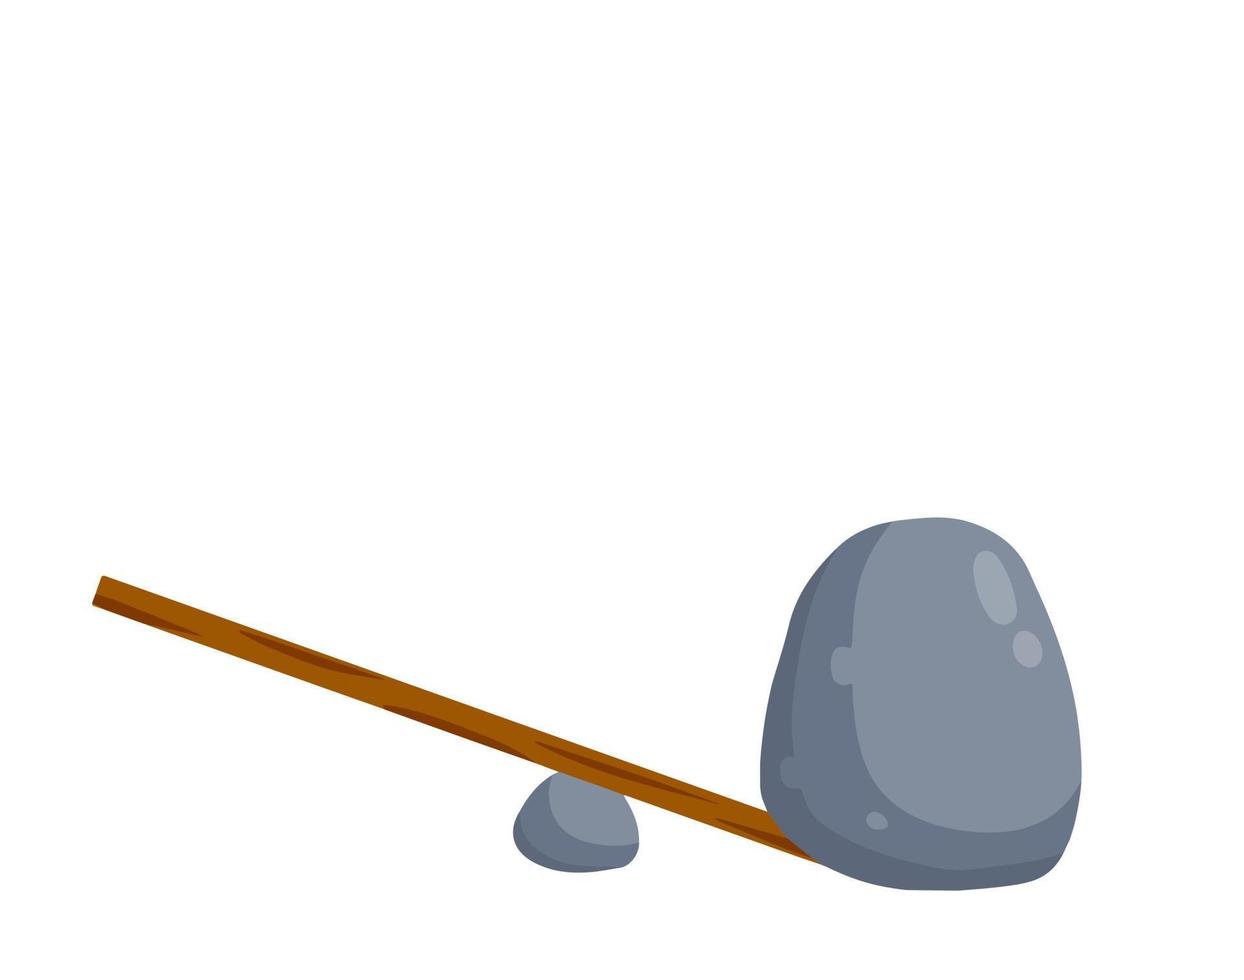 Lever of stick with stone. Lifting heavy cobblestone. Moving the boulder. Balancing and leverage. Flat cartoon vector